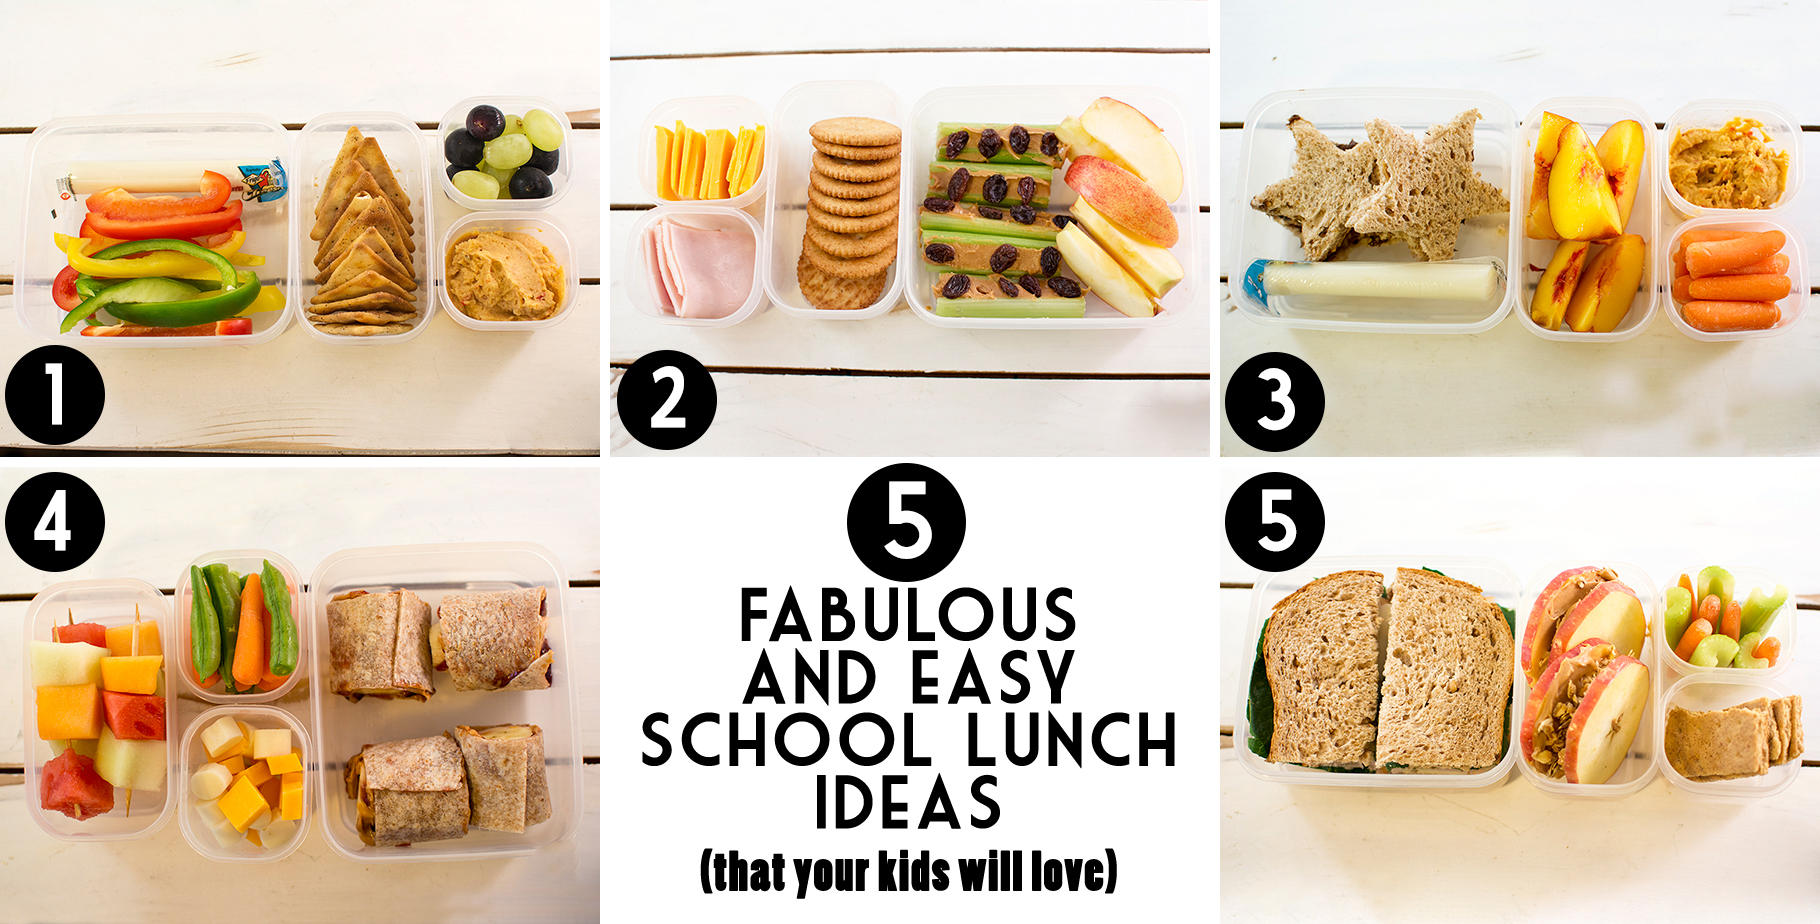 5 fabulous and easy school lunch ideas your kids will love